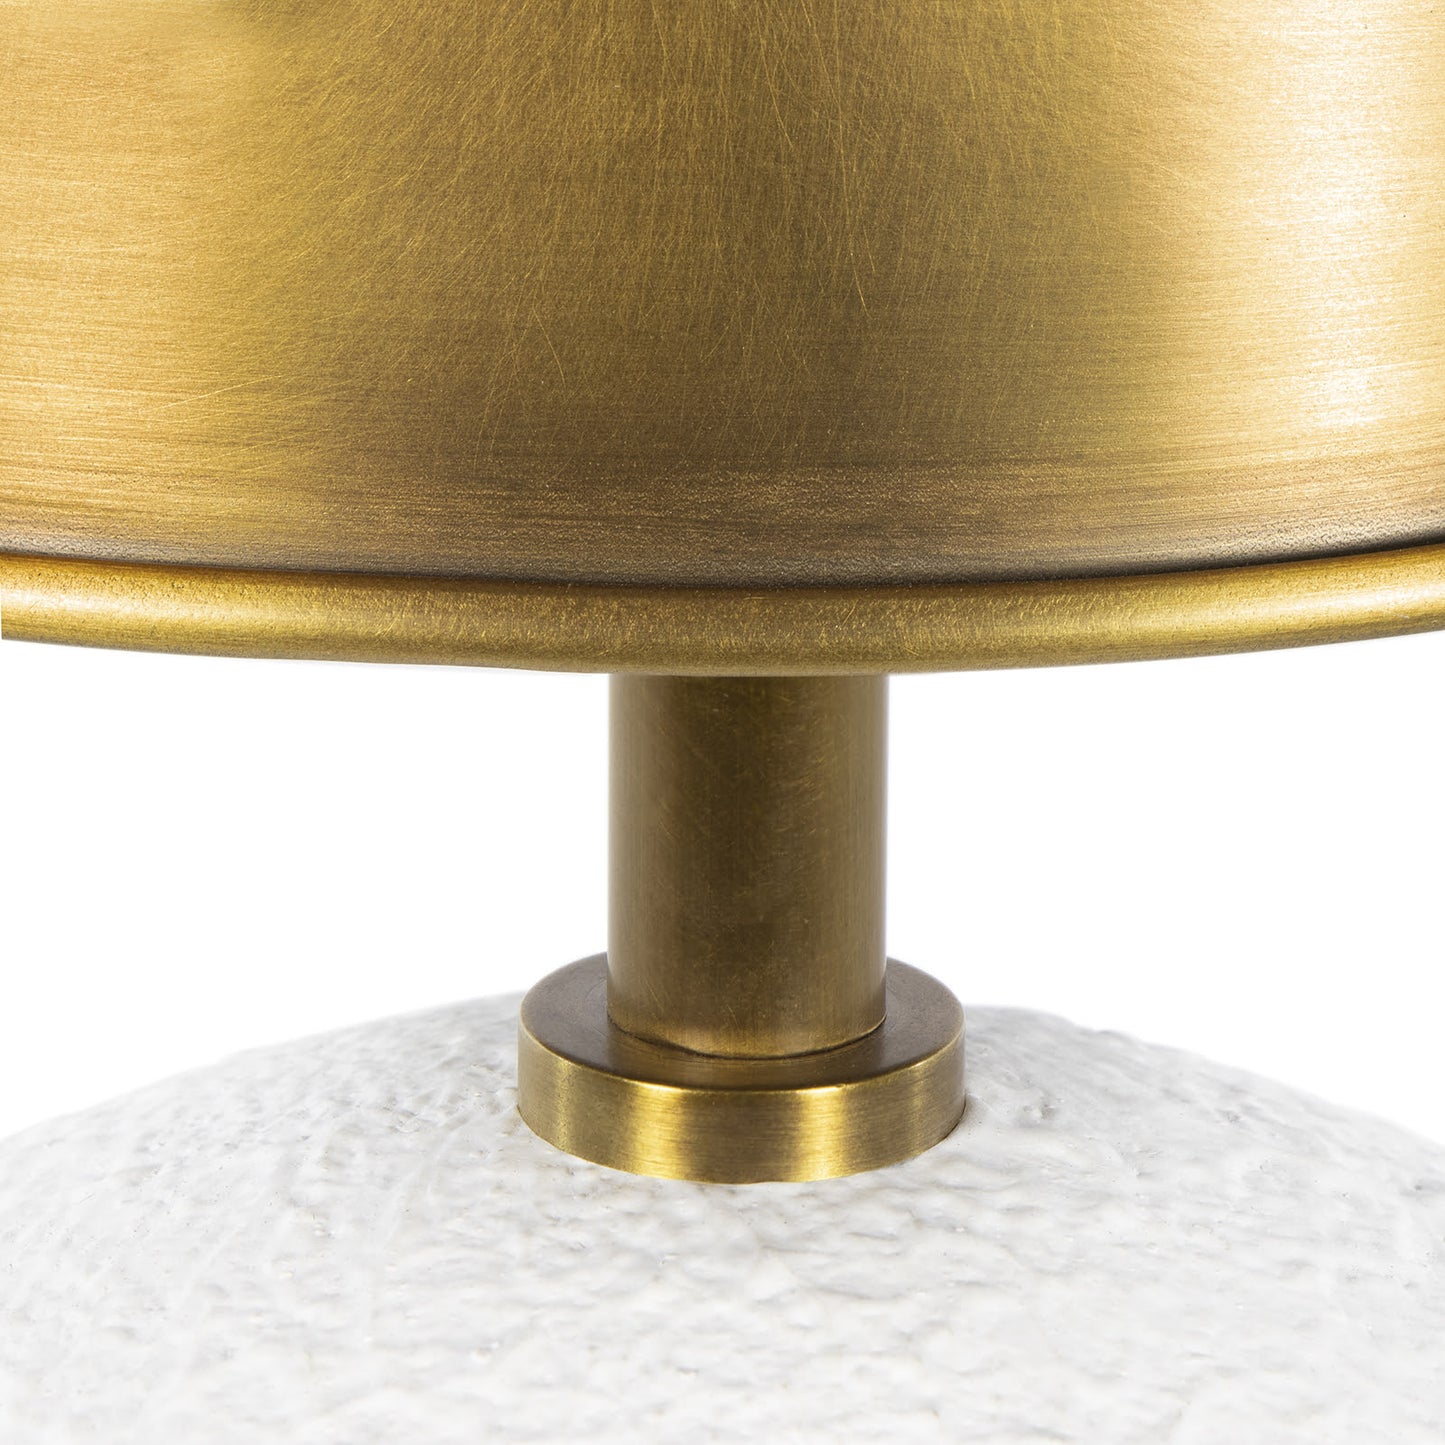 Hattie Concrete Mini Lamp in Natural Brass by Southern Living